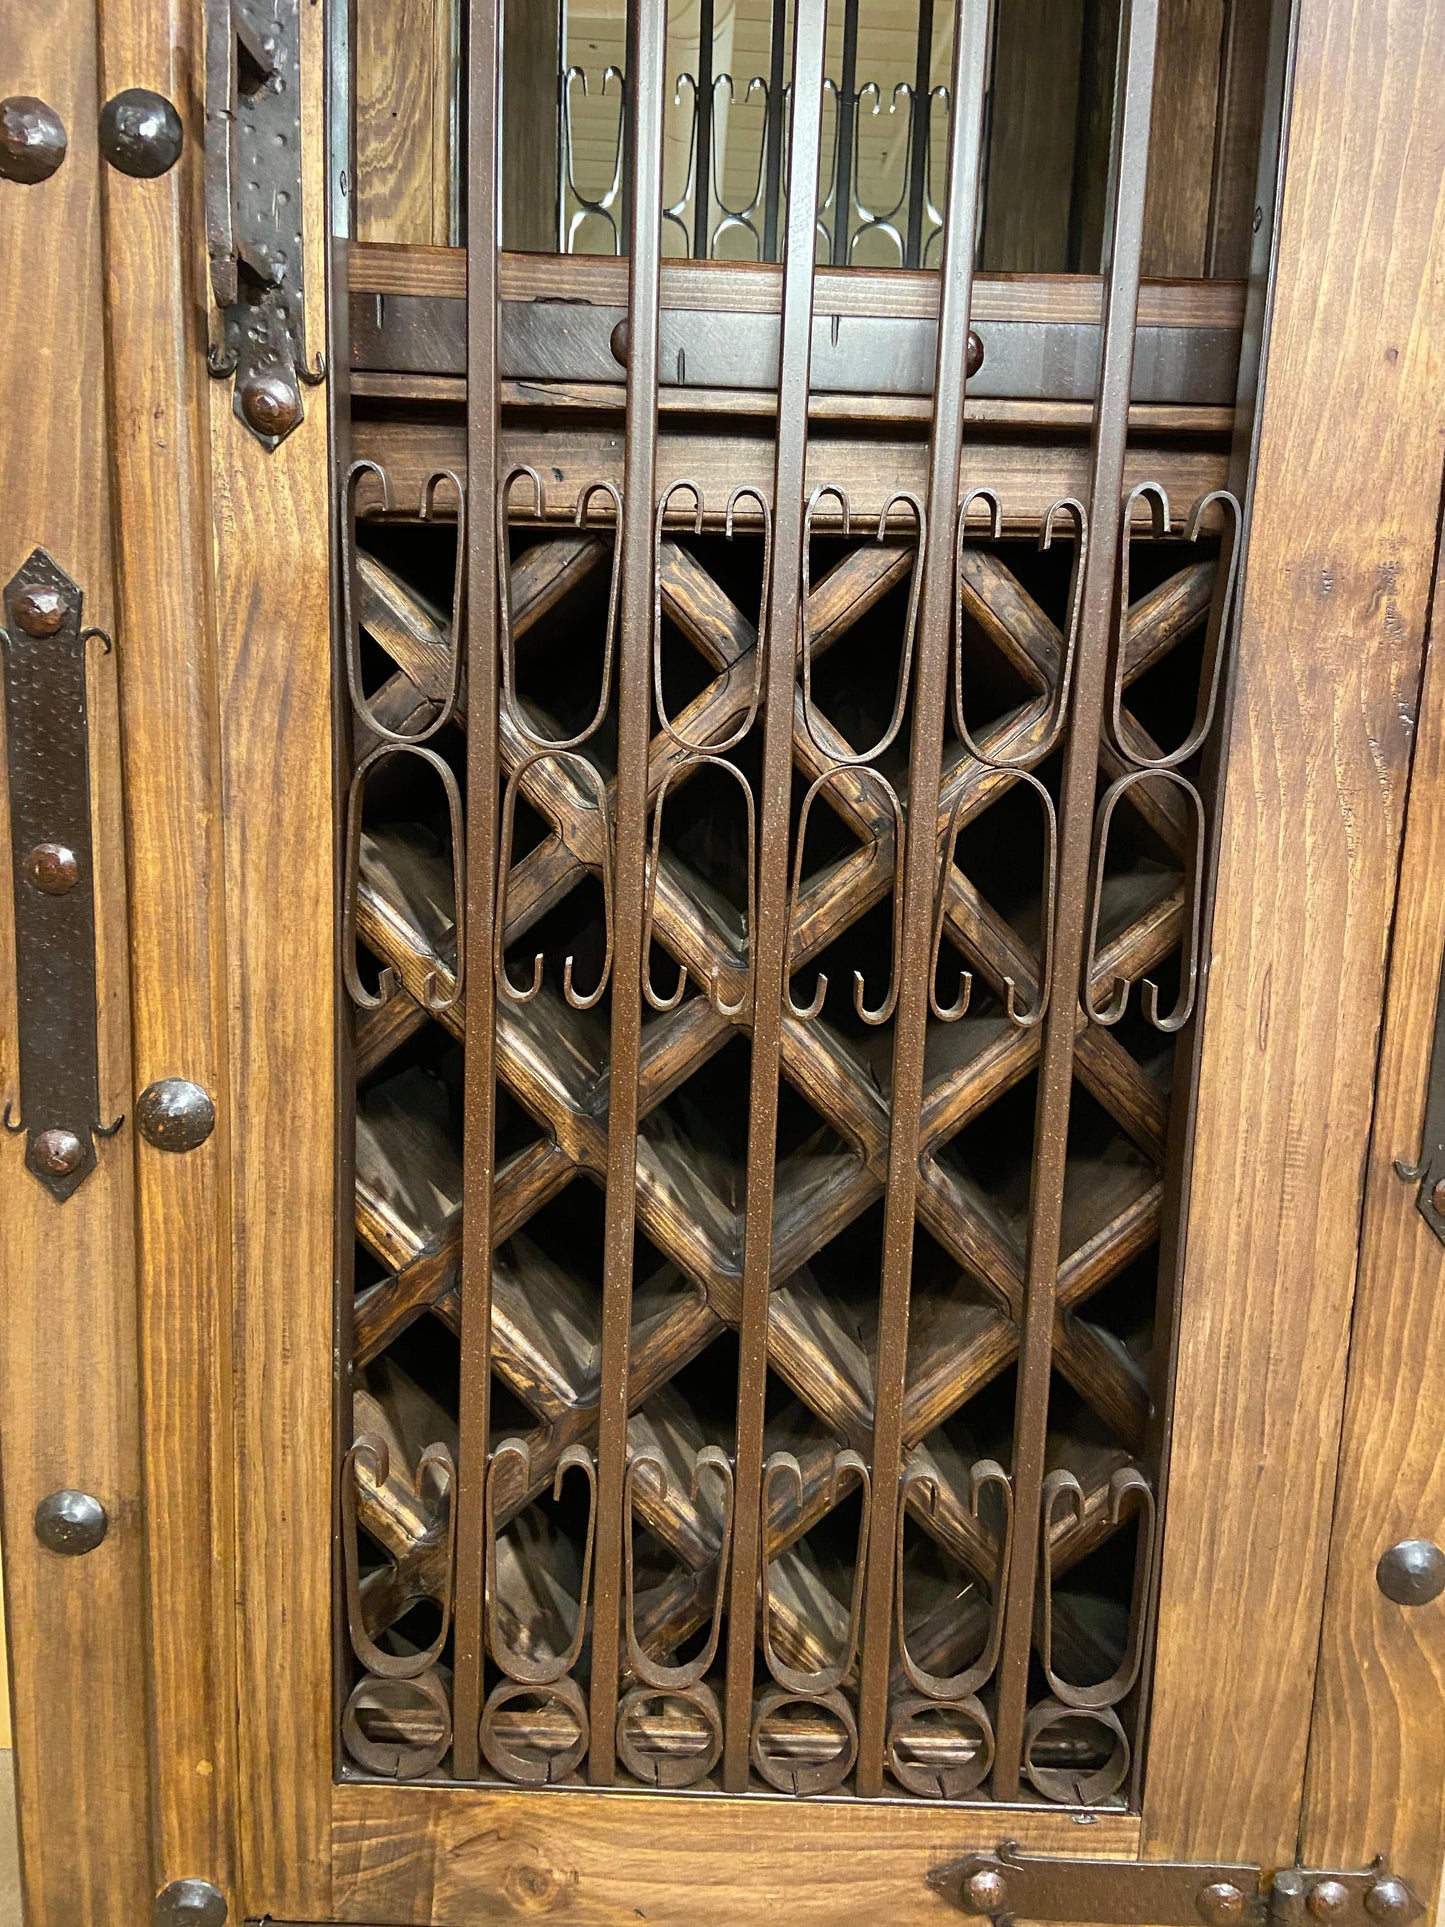 Front view of wine cabinet showing hand forged steel door closed in front of solid wood wine storage 